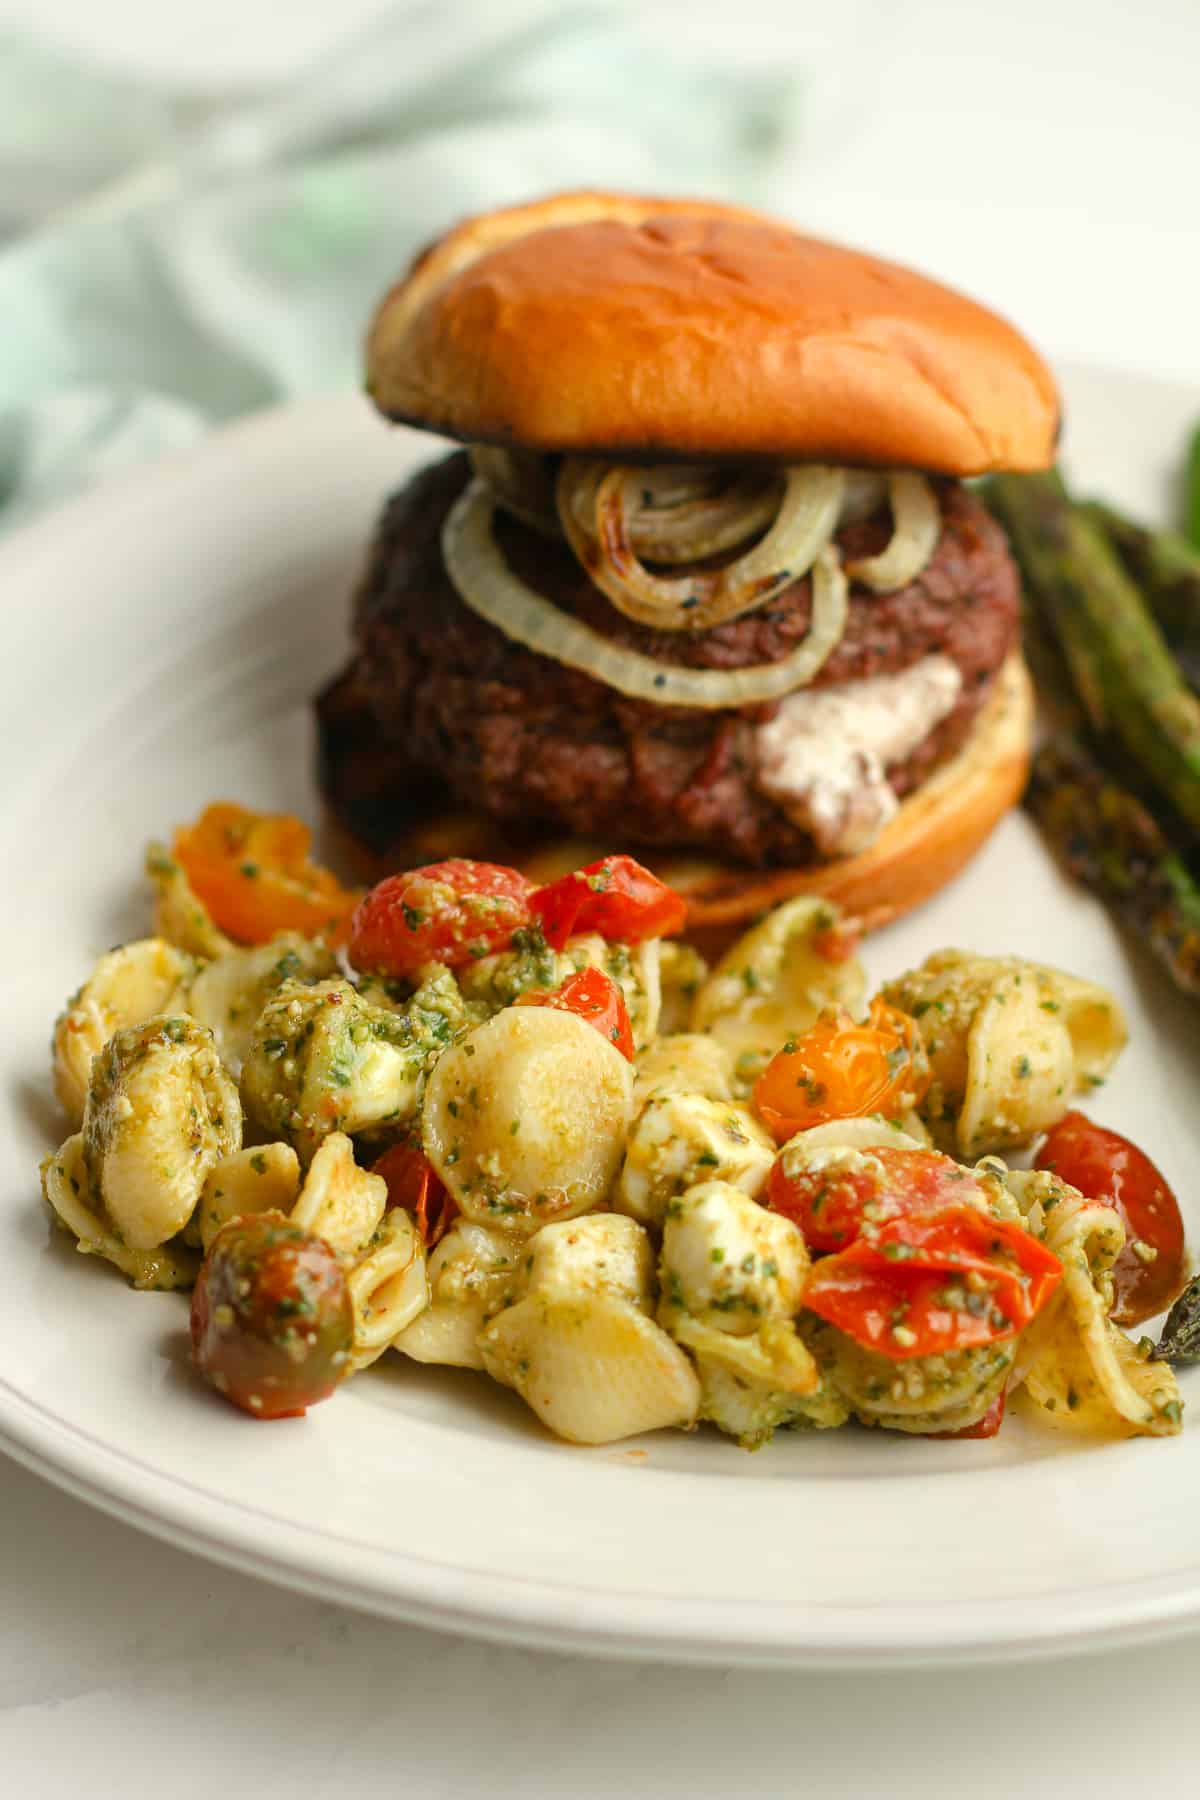 Side shot of a plate of pasta salad with a burger.